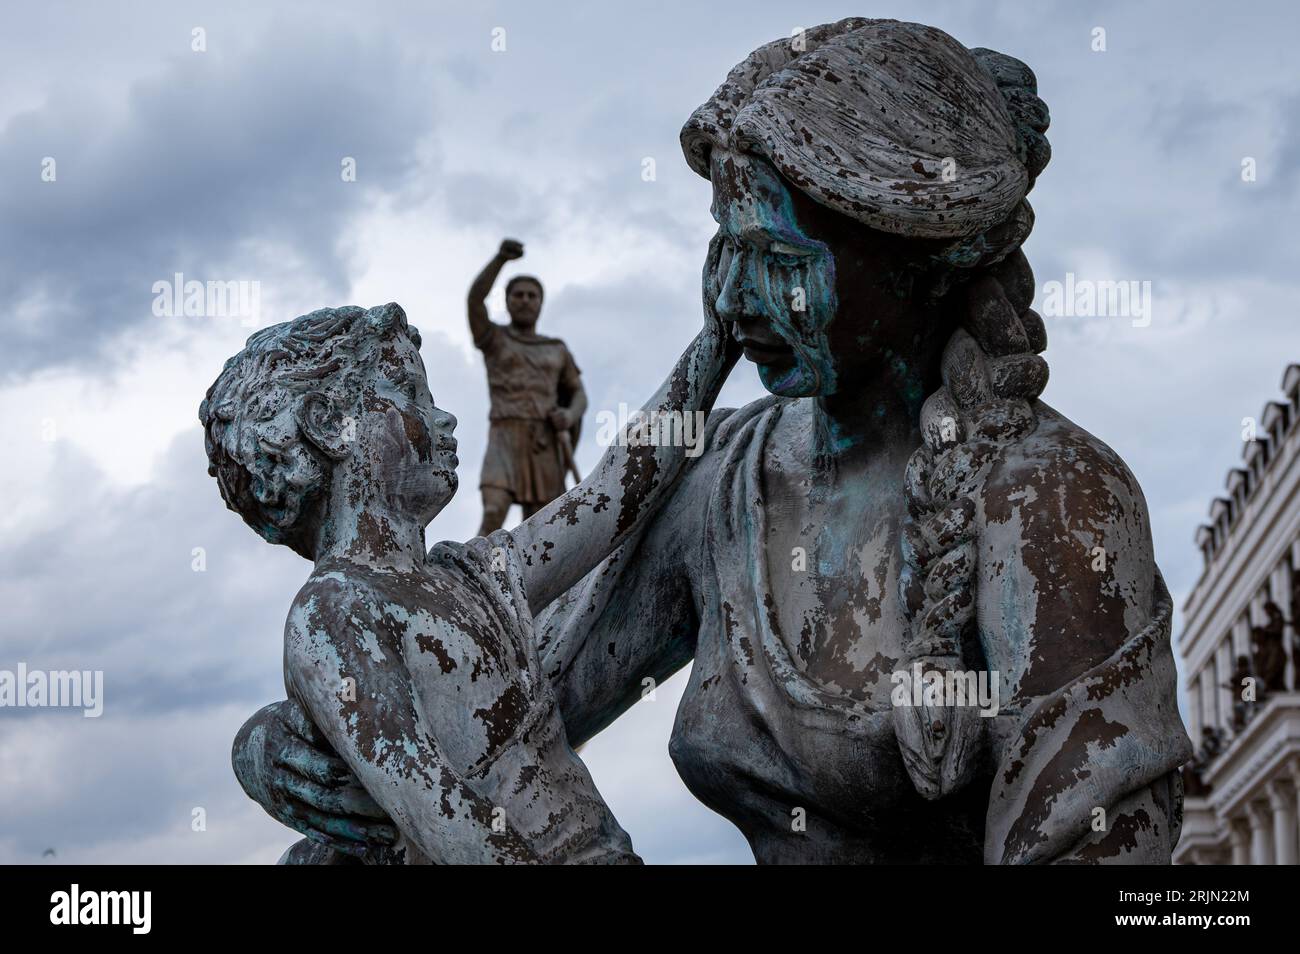 The statues of baby Alexander The Great, his mother, and his father King Philip in Skopje, Macedonia Stock Photo